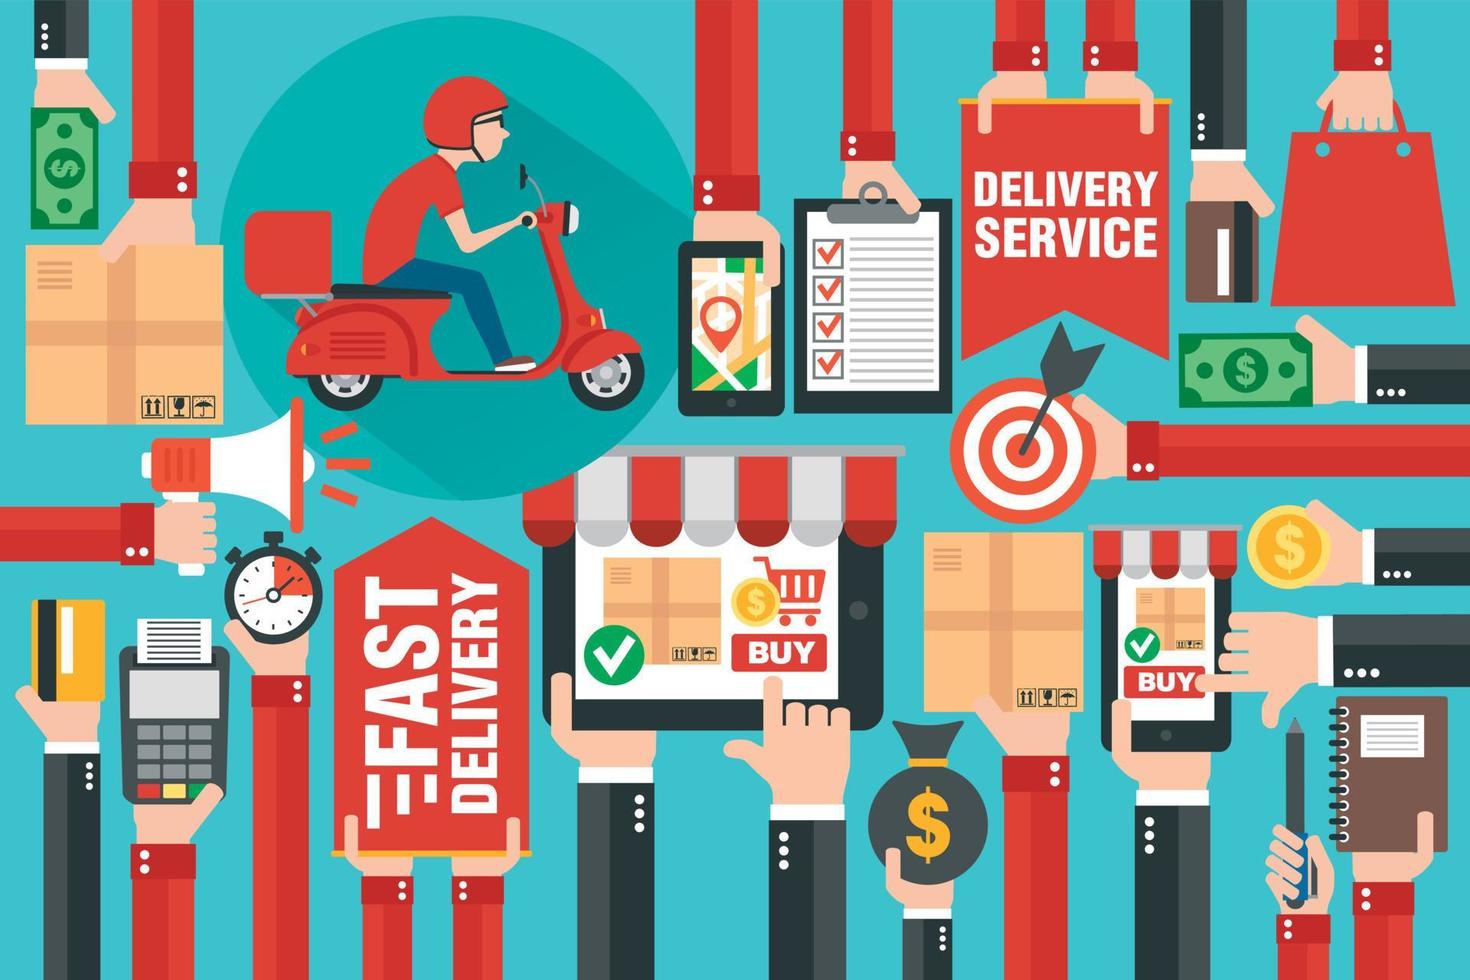 Fast delivery package by scooter. Online delivery service. Internet e-commerce. Shopping online on laptop, smartphone or website. Concept flat design vector